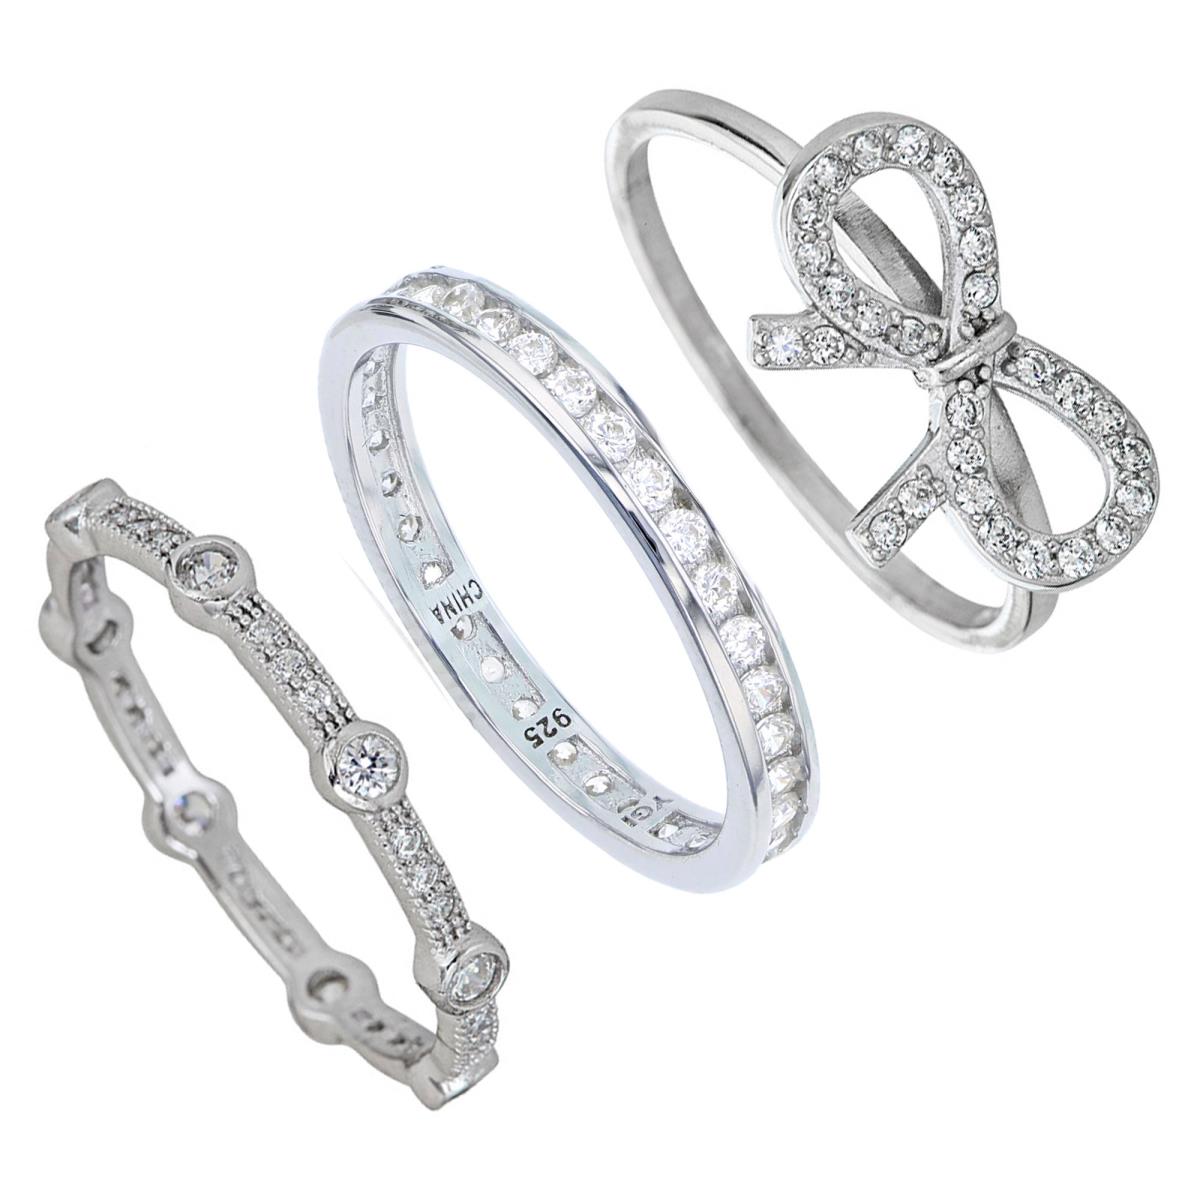 Sterling Silver Pave Ribbon, Stackable Eternity & Channel Set Ring Set